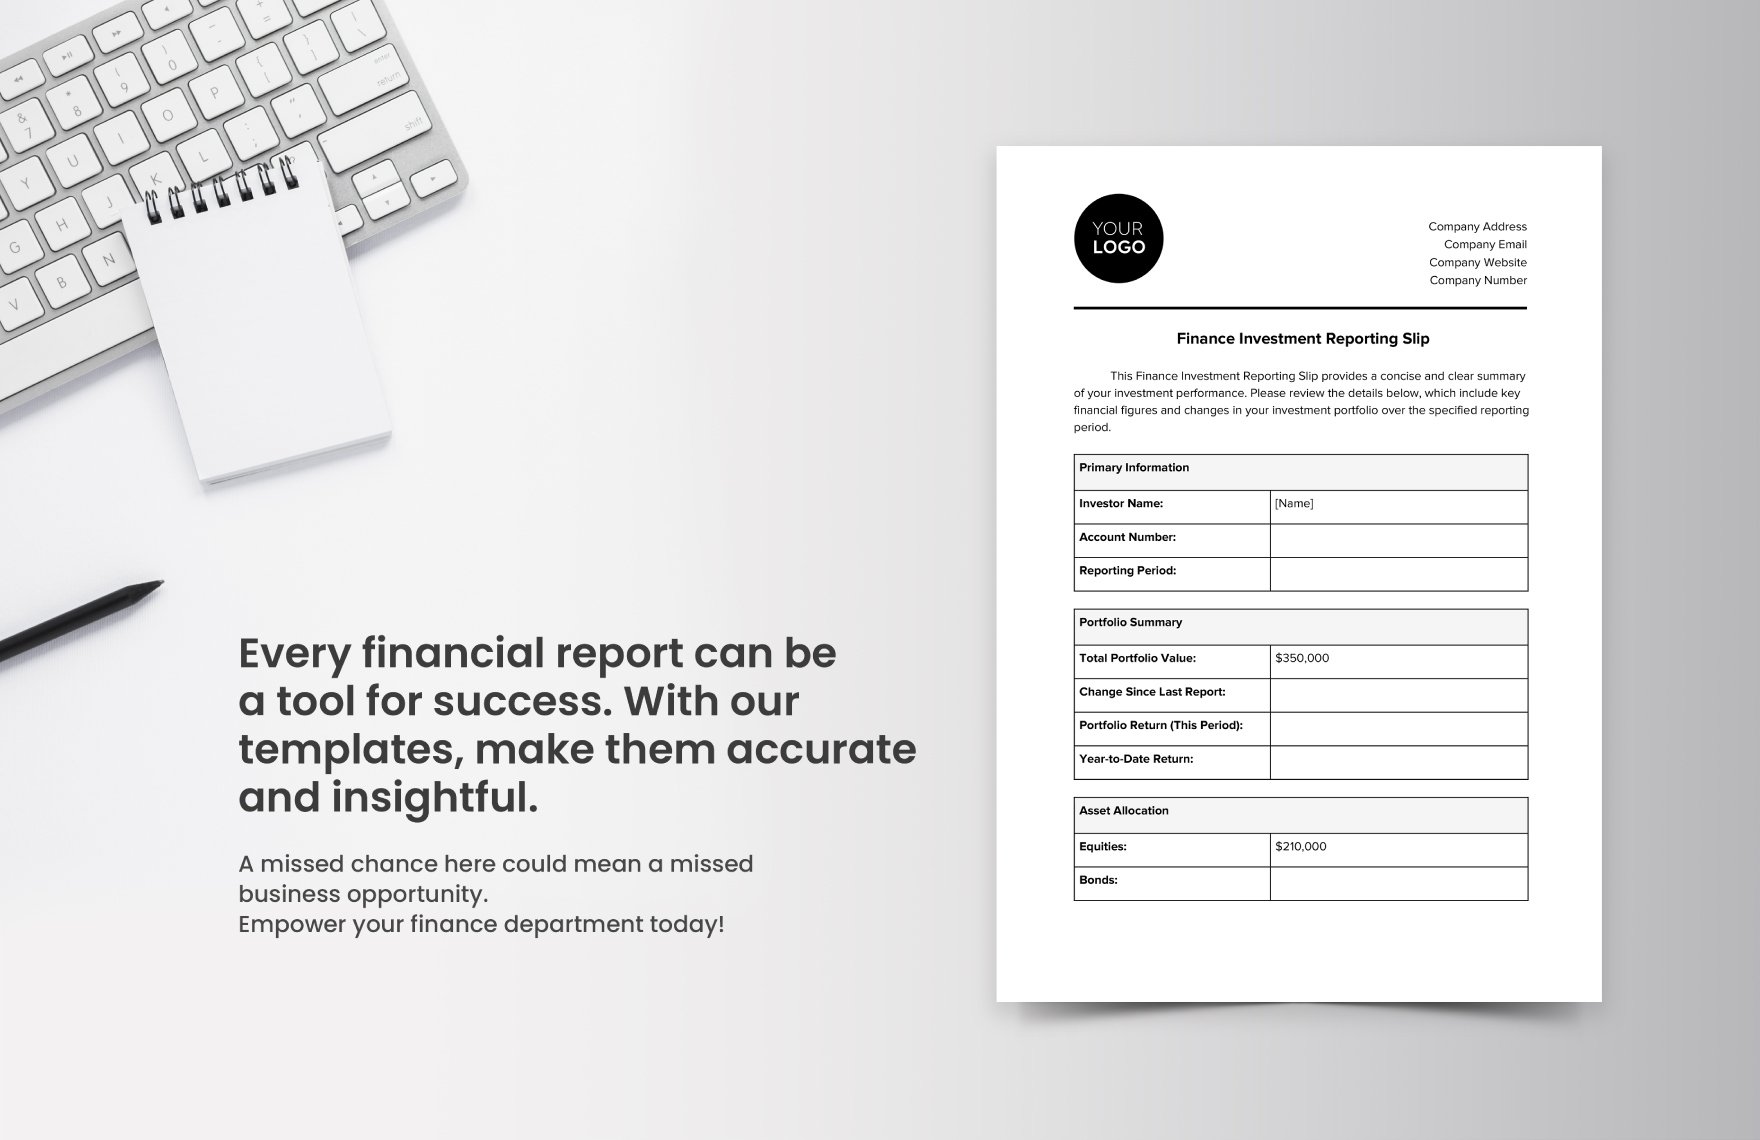 Finance Investment Reporting Slip Template